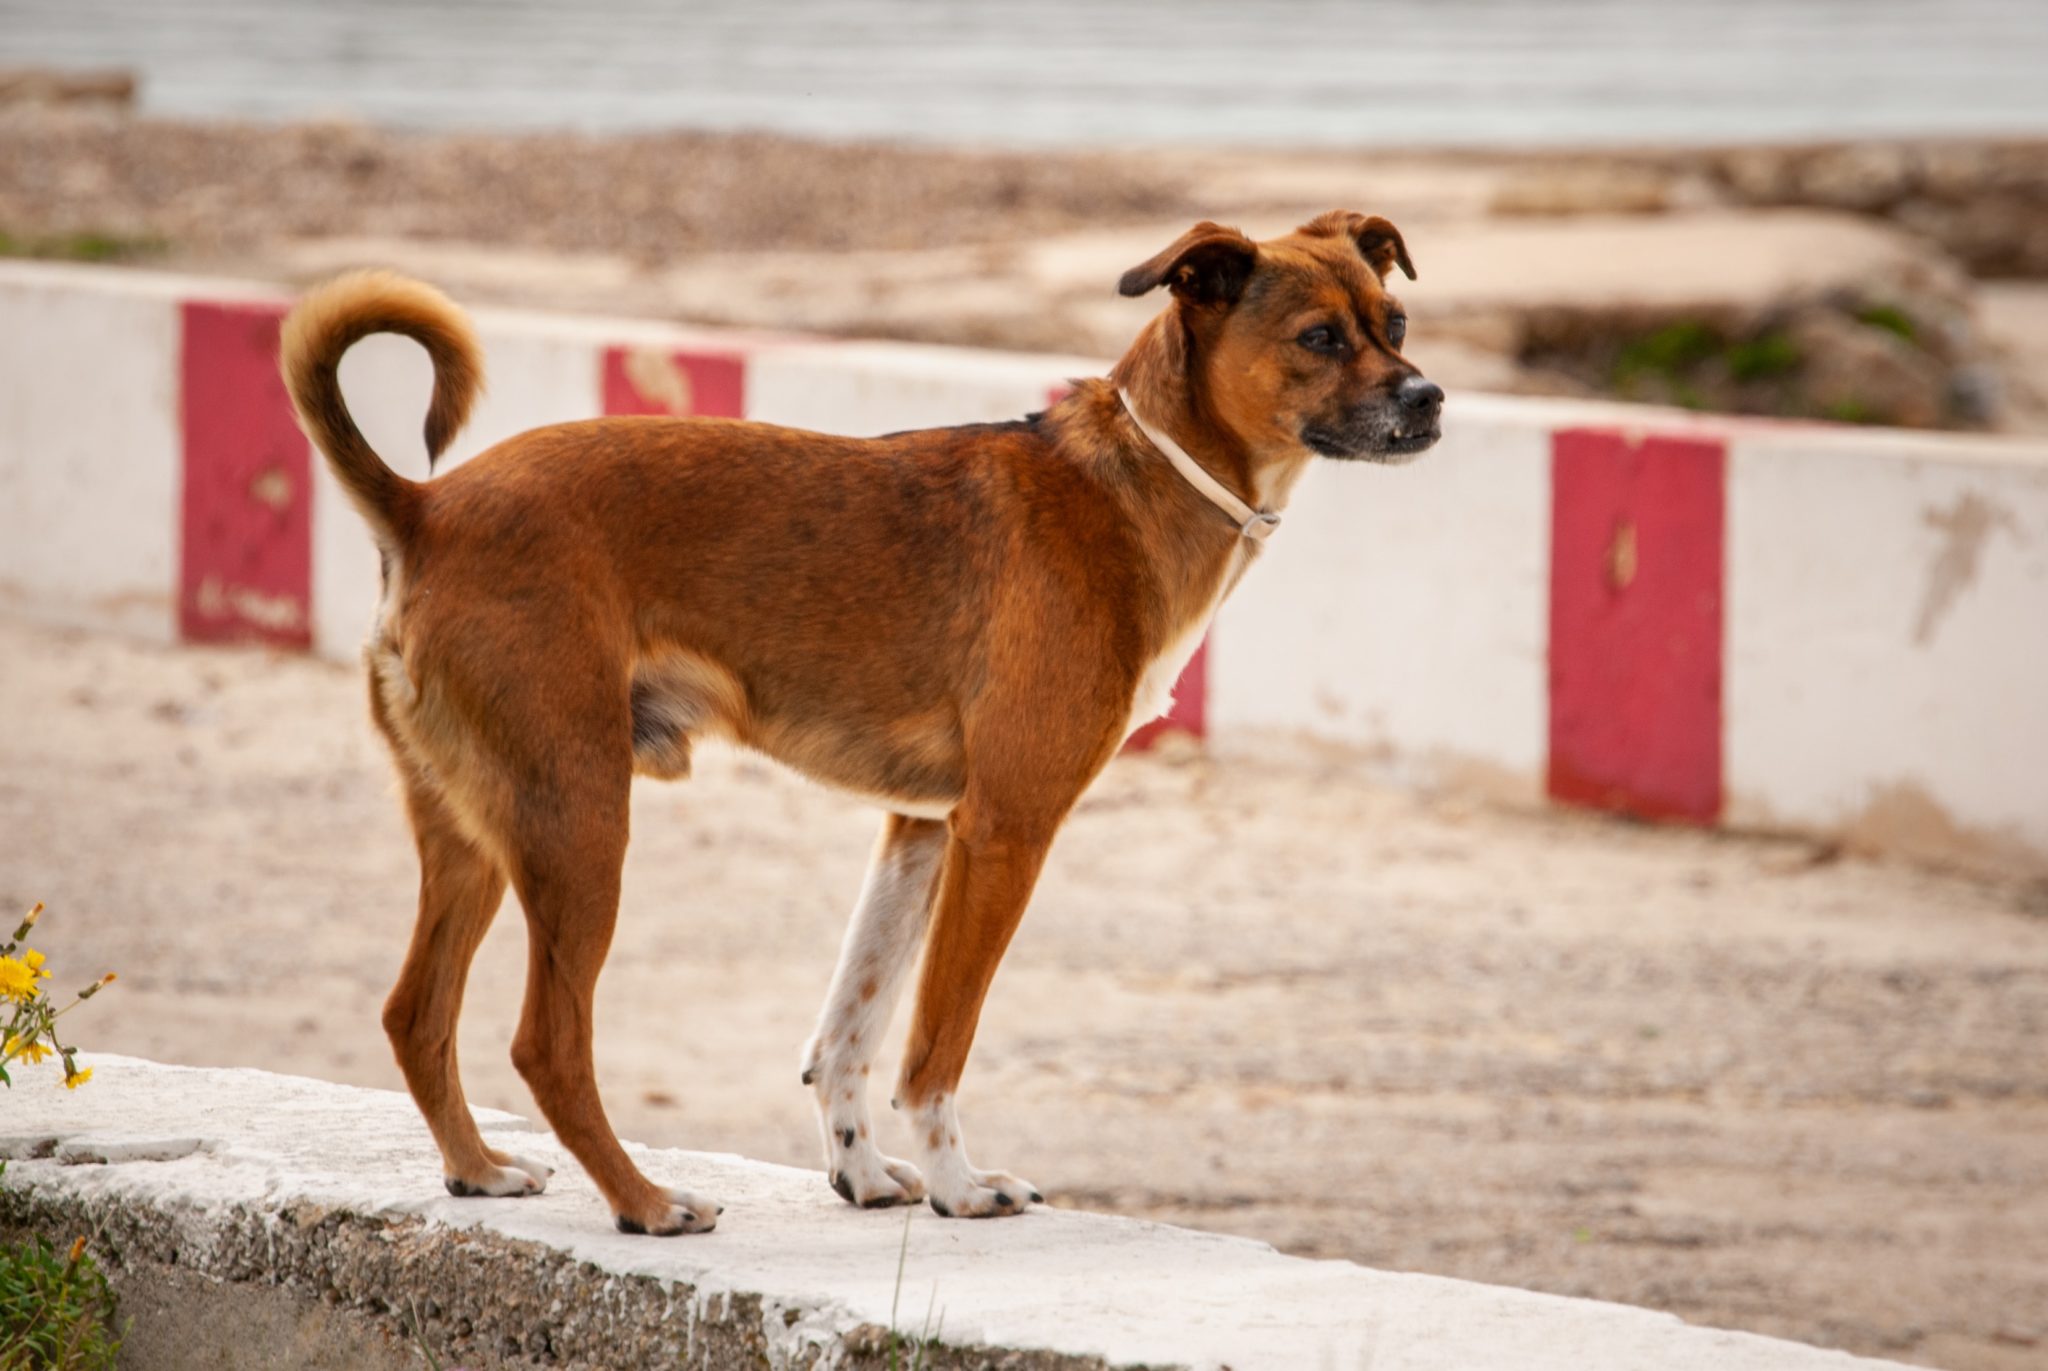 Photo of reddish-brown dog with curly tail standing on a concrete ledge with a red and white concrete wall and beach in background